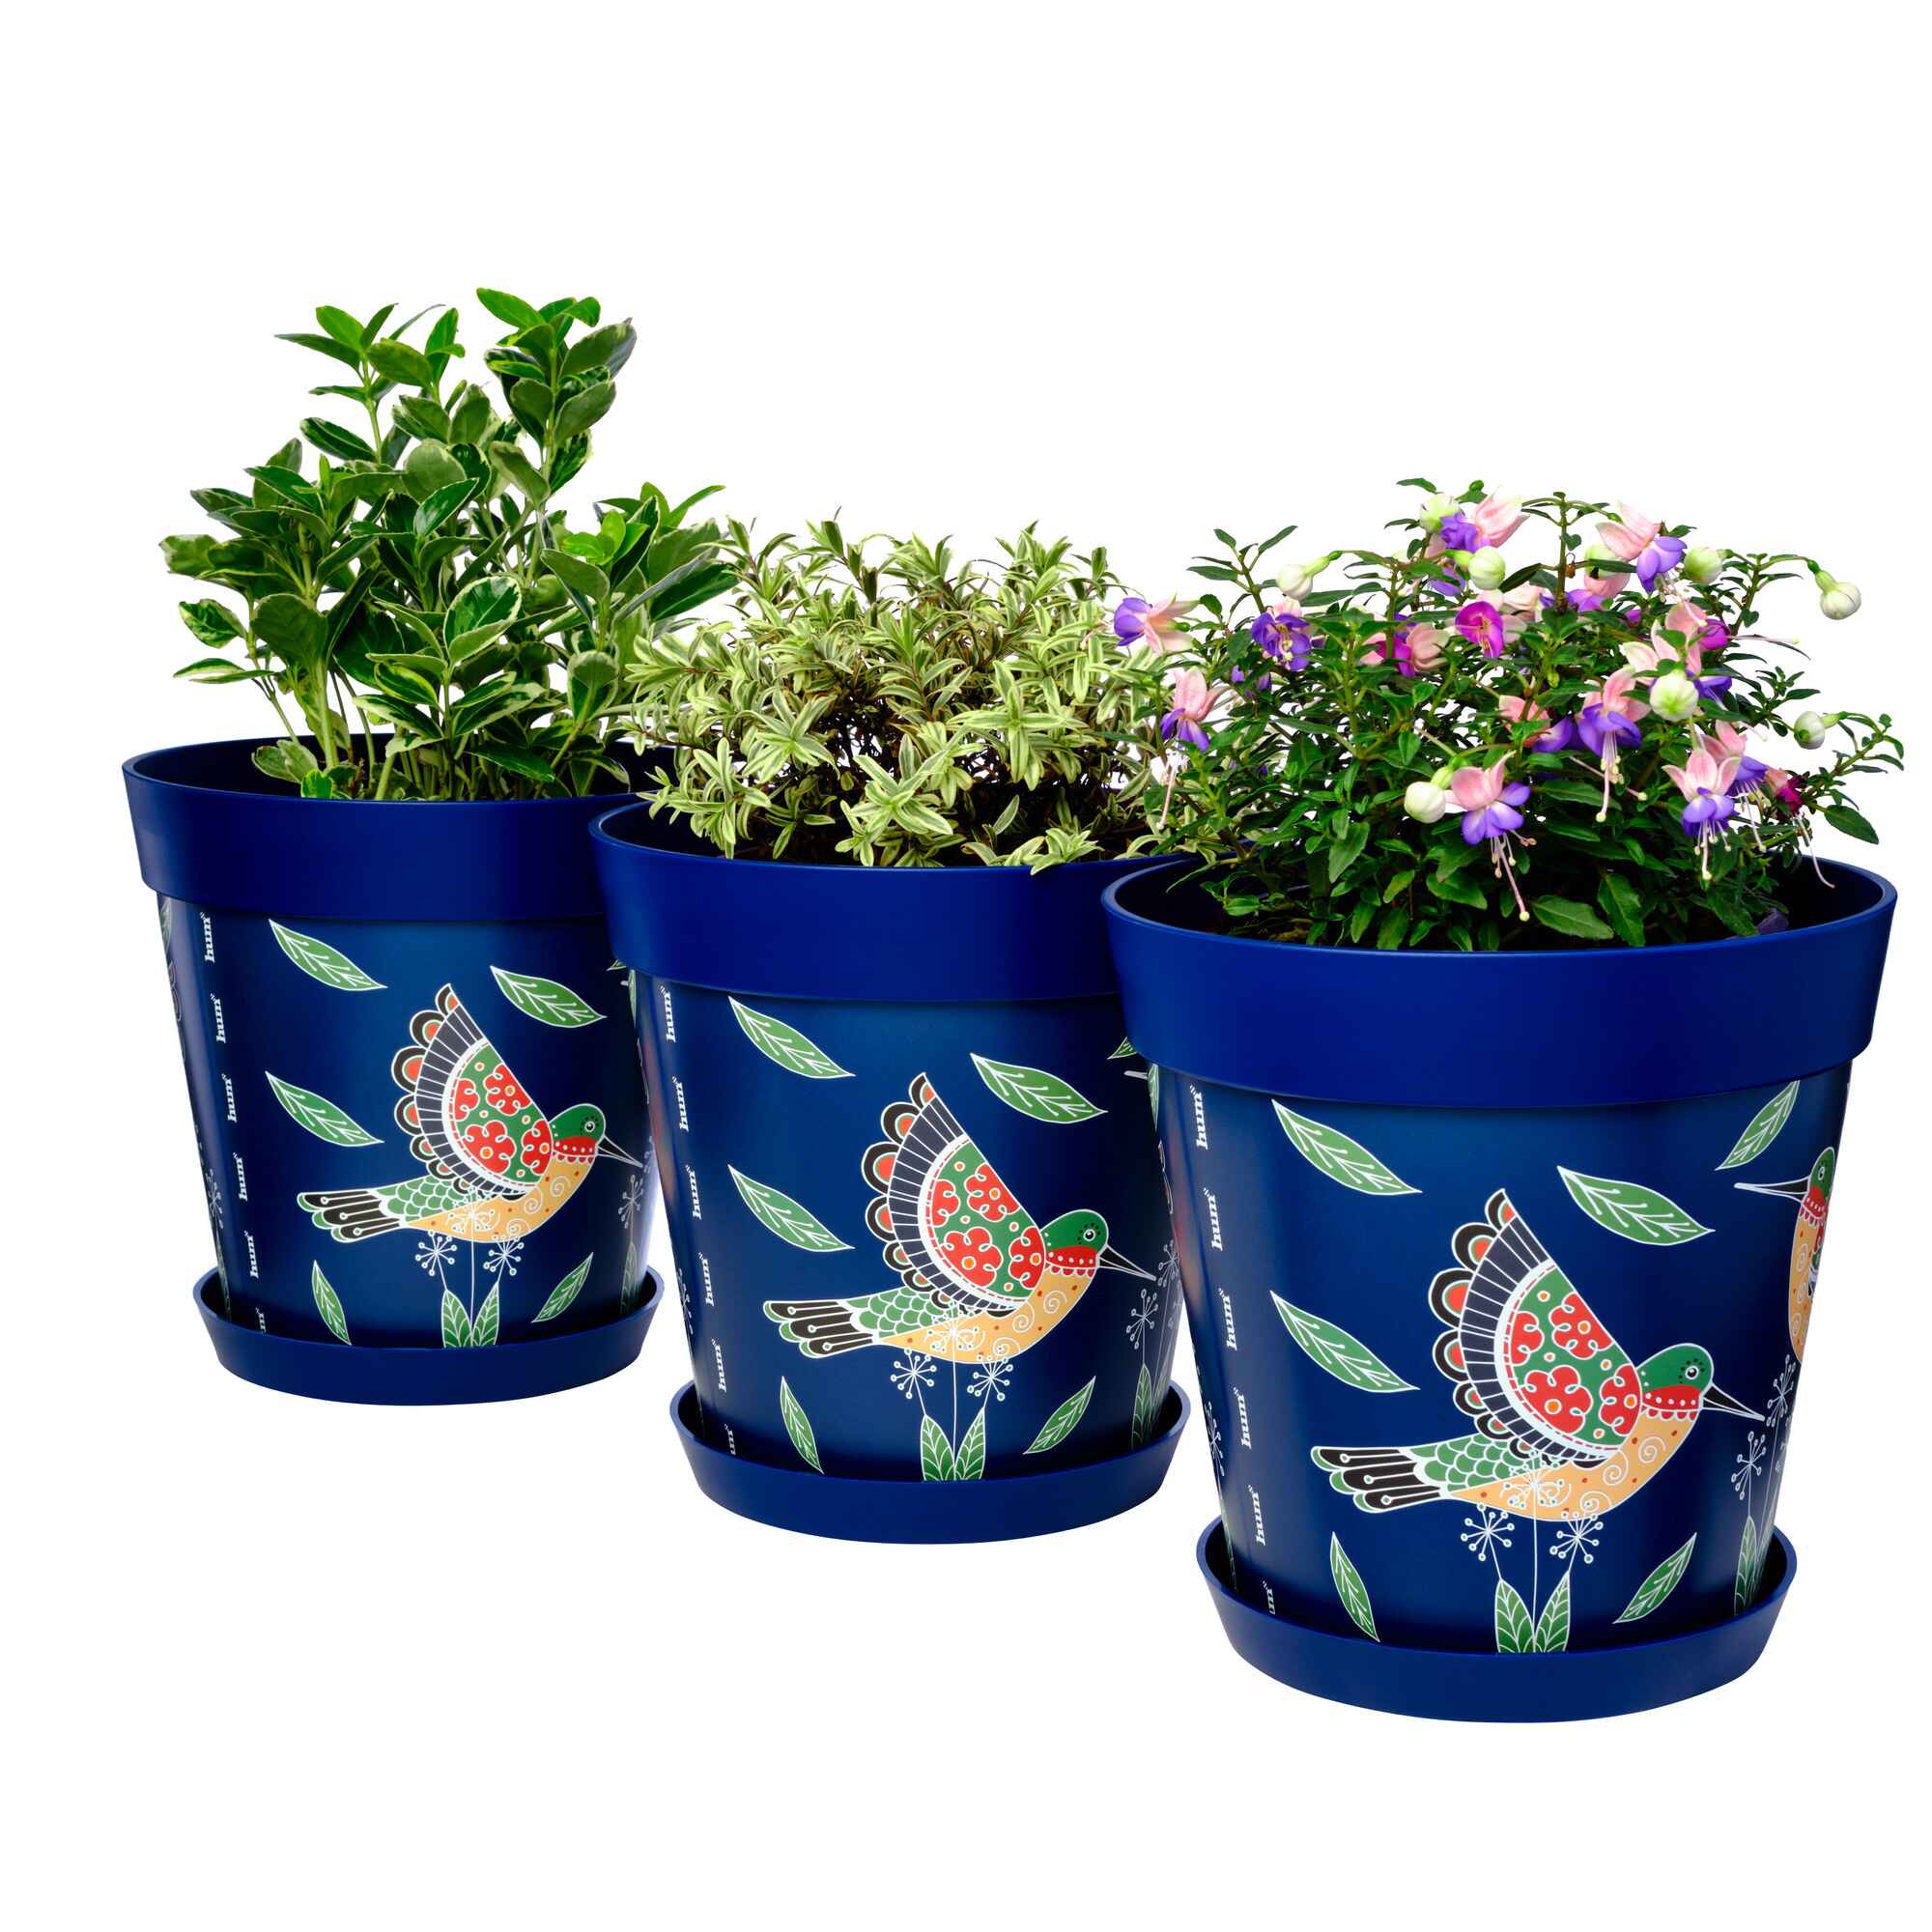 Picture of 3 Planted Large 25cm Blue Hummingbird Pattern Plastic Indoor/Outdoor Flowerpots  and Saucers